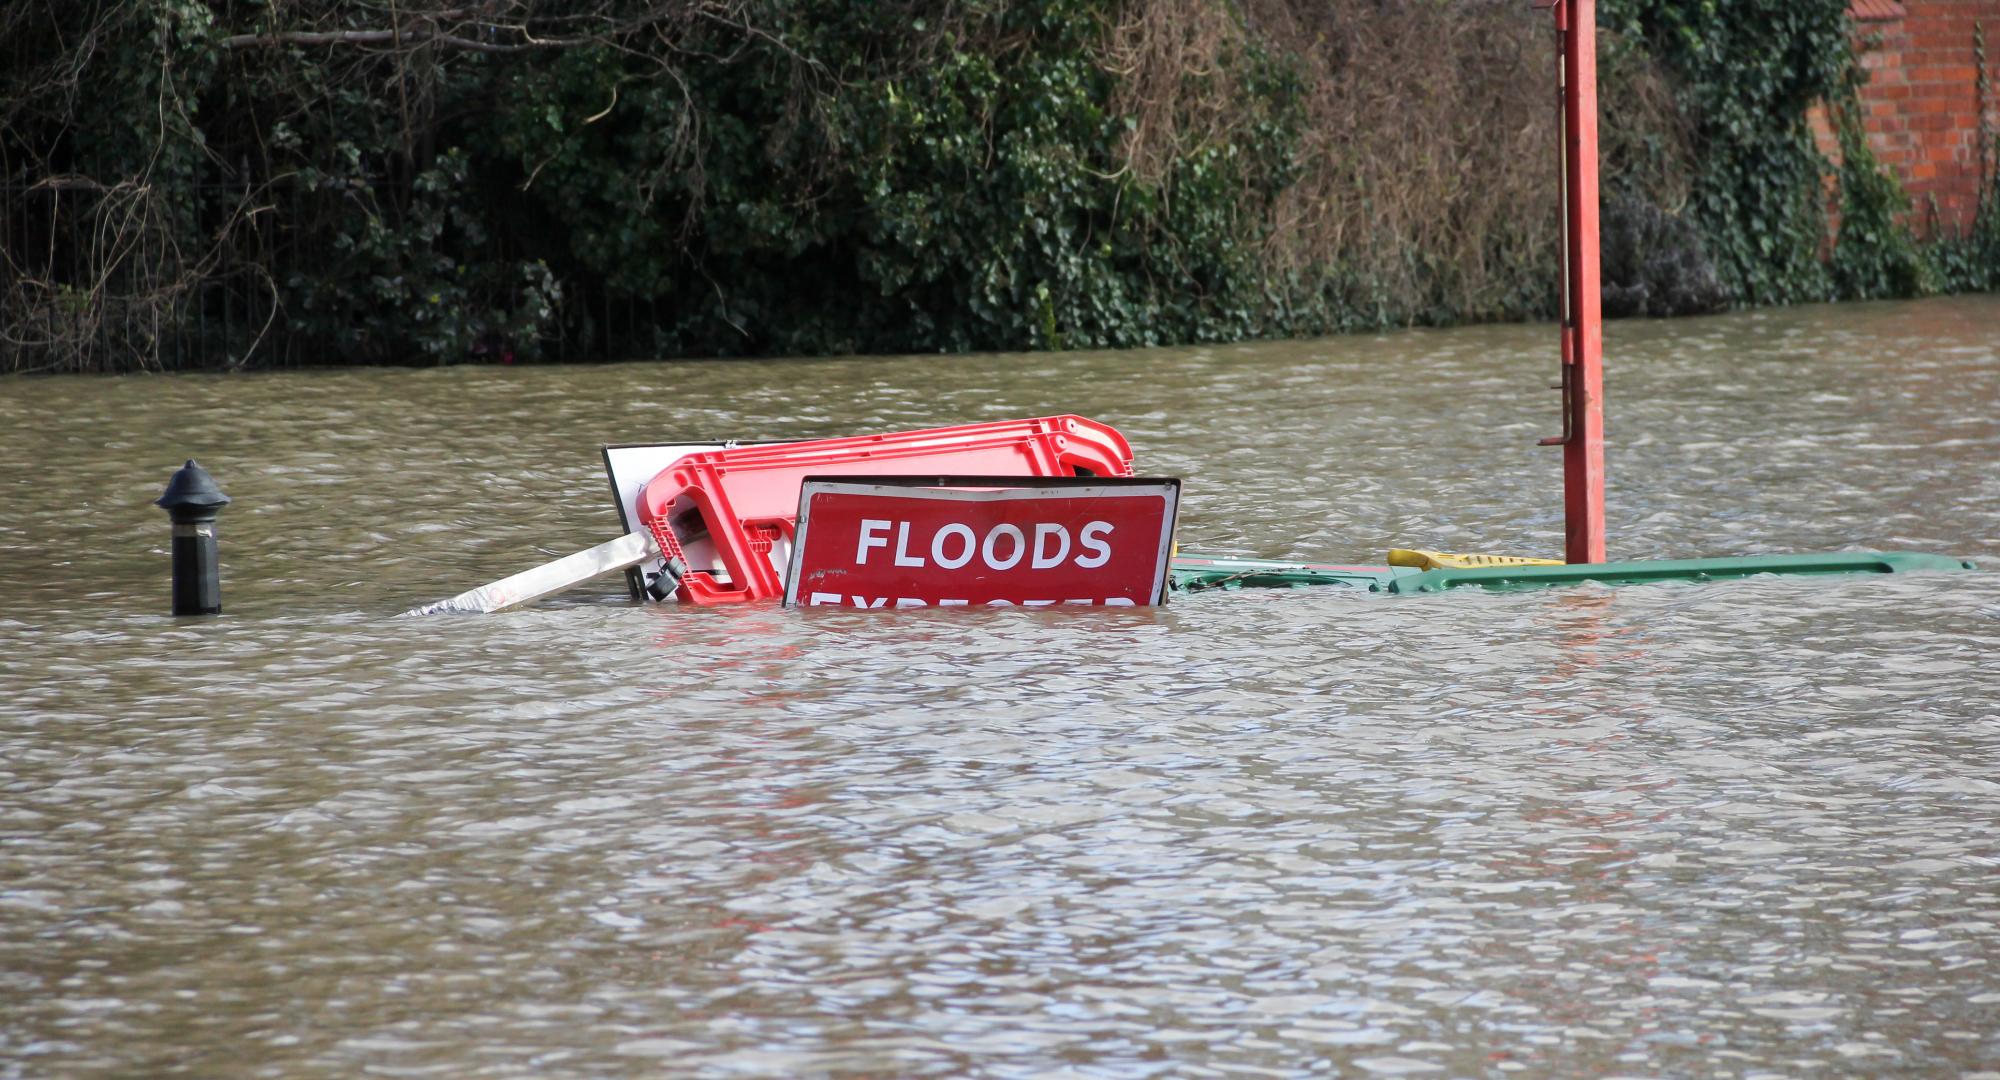 Road closed Flood signs underwater as floods have risen over them in Shrewsbury Shropshire during floods in February 2020